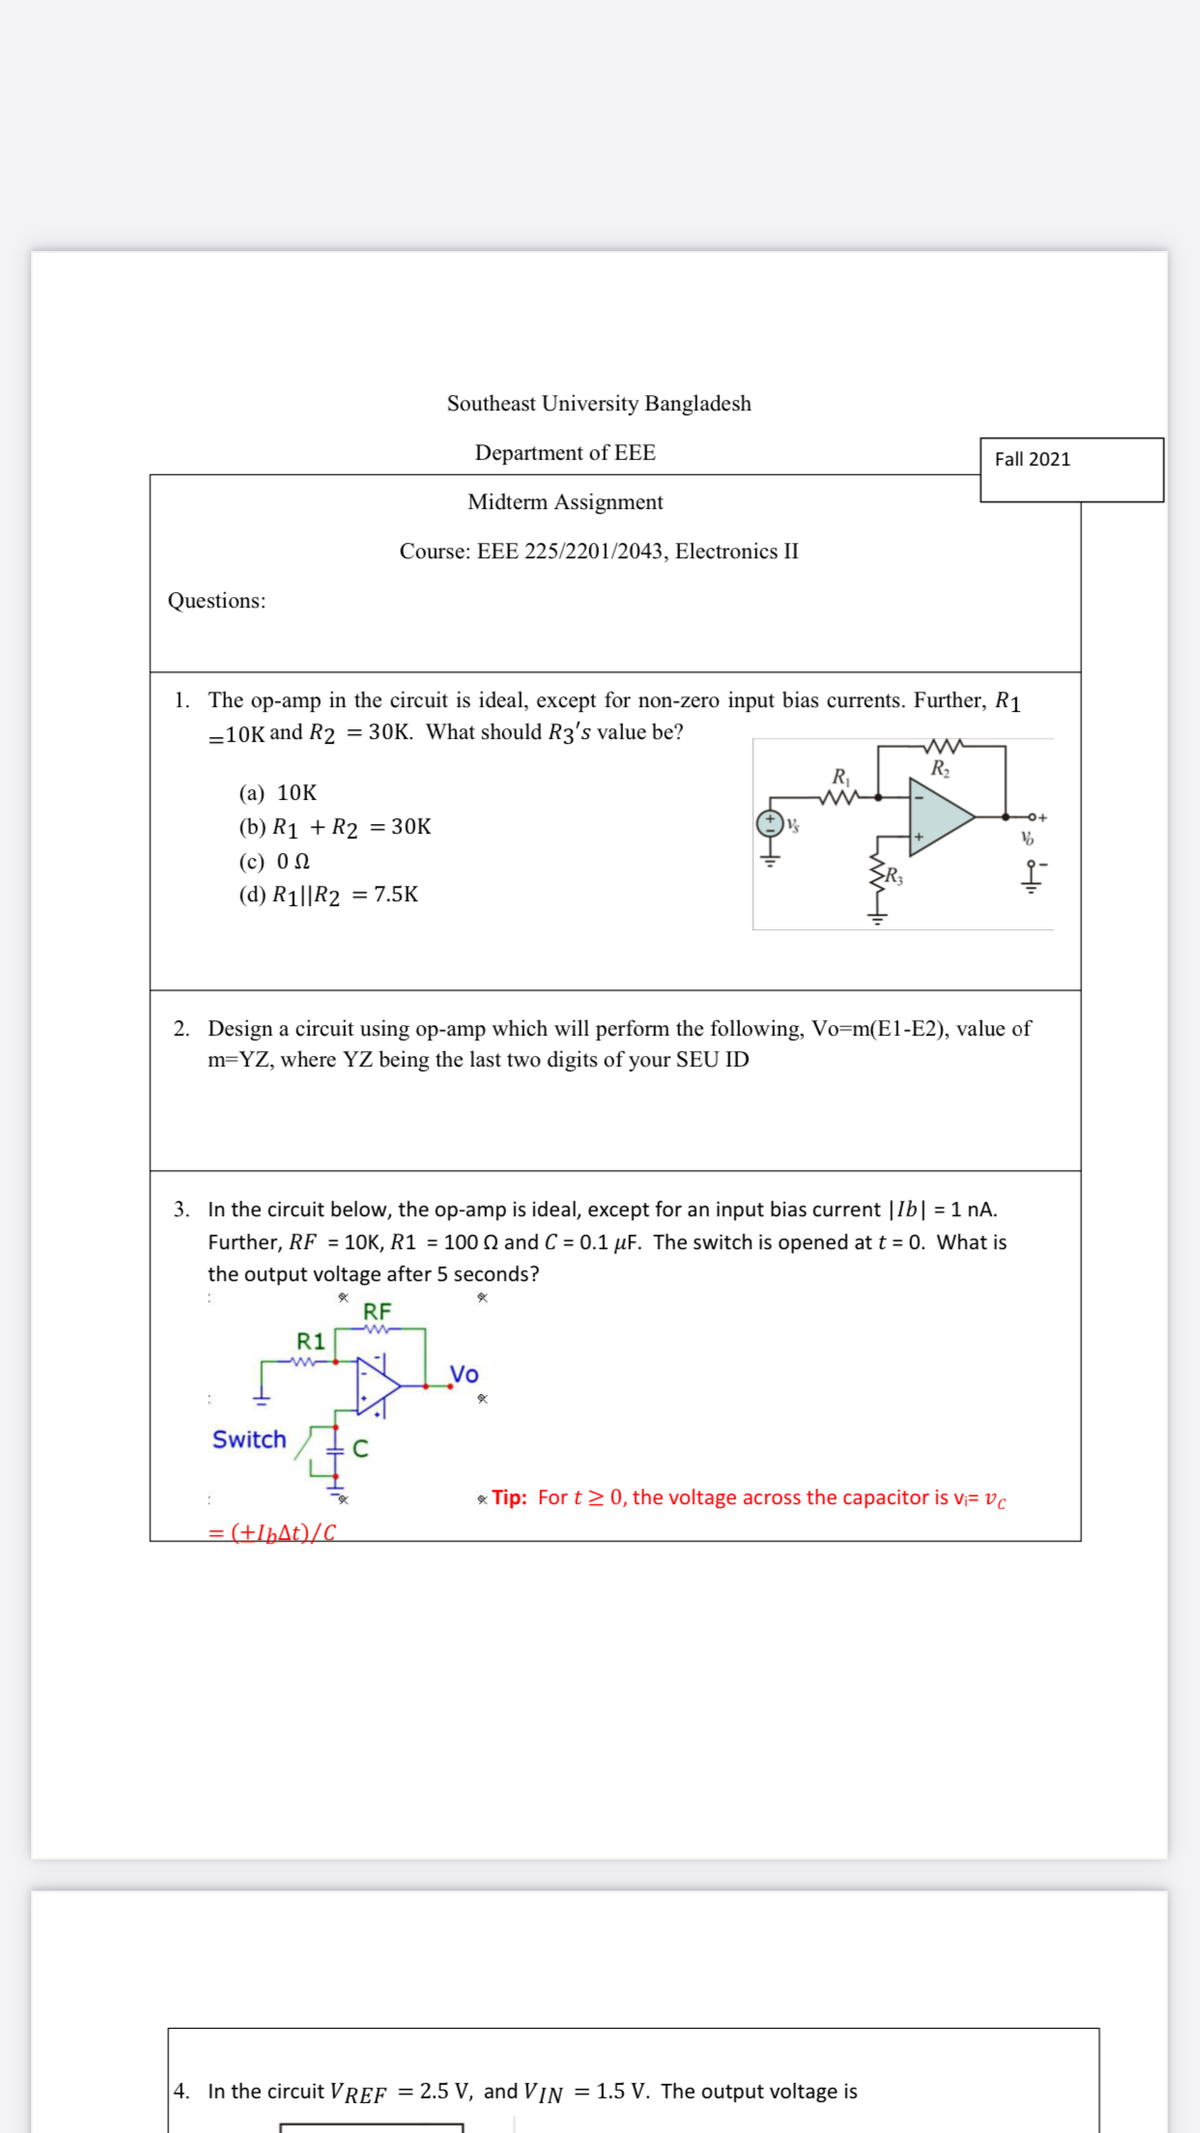 Southeast University Bangladesh
Department of EEE
Fall 2021
Midterm Assignment
Course: EEE 225/2201/2043, Electronics II
Questions:
1. The op-amp in the circuit is ideal, except for non-zero input bias currents. Further, R1
-10K and R2 = 30K. What should R3's value be?
R2
(а) 10K
(b) R1 + R2 = 30K
(с) 0
(d) R1||R2 = 7.5K
2. Design a circuit using op-amp which will perform the following, Vo=m(E1-E2), value of
m=YZ, where YZ being the last two digits of your SEU ID
3. In the circuit below, the op-amp is ideal, except for an input bias current |Ib| = 1 nA.
urther, RF = 1OK, R1 = 100 Q and C = 0.1 µF. The switch is opened at t = 0. What is
the output voltage after 5 seconds?
RF
R1
Vo
Switch
* Tip: For t> 0, the voltage across the capacitor is v;= vc
= (+IþAt)/C_
|4. In the circuit VREF = 2.5 V, and VIN
= 1.5 V. The output voltage is
